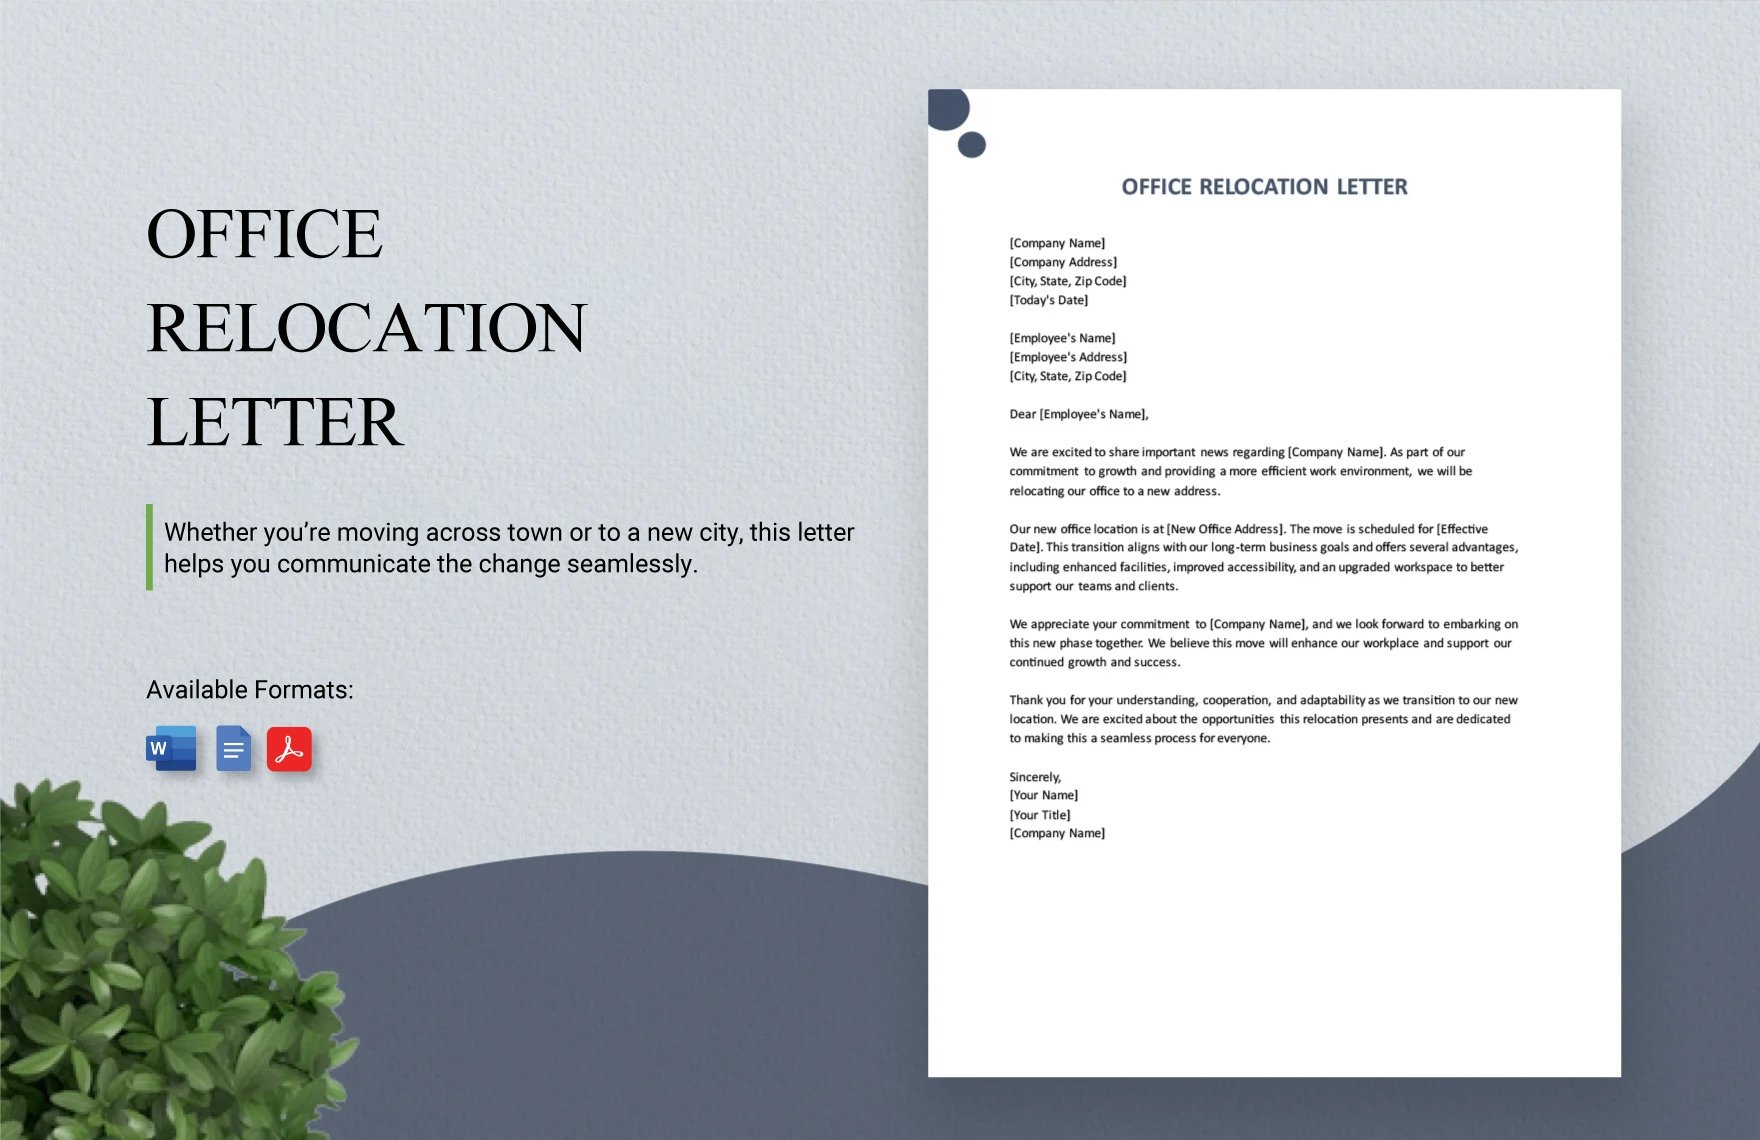 Office Relocation Letter in Word, Google Docs, PDF